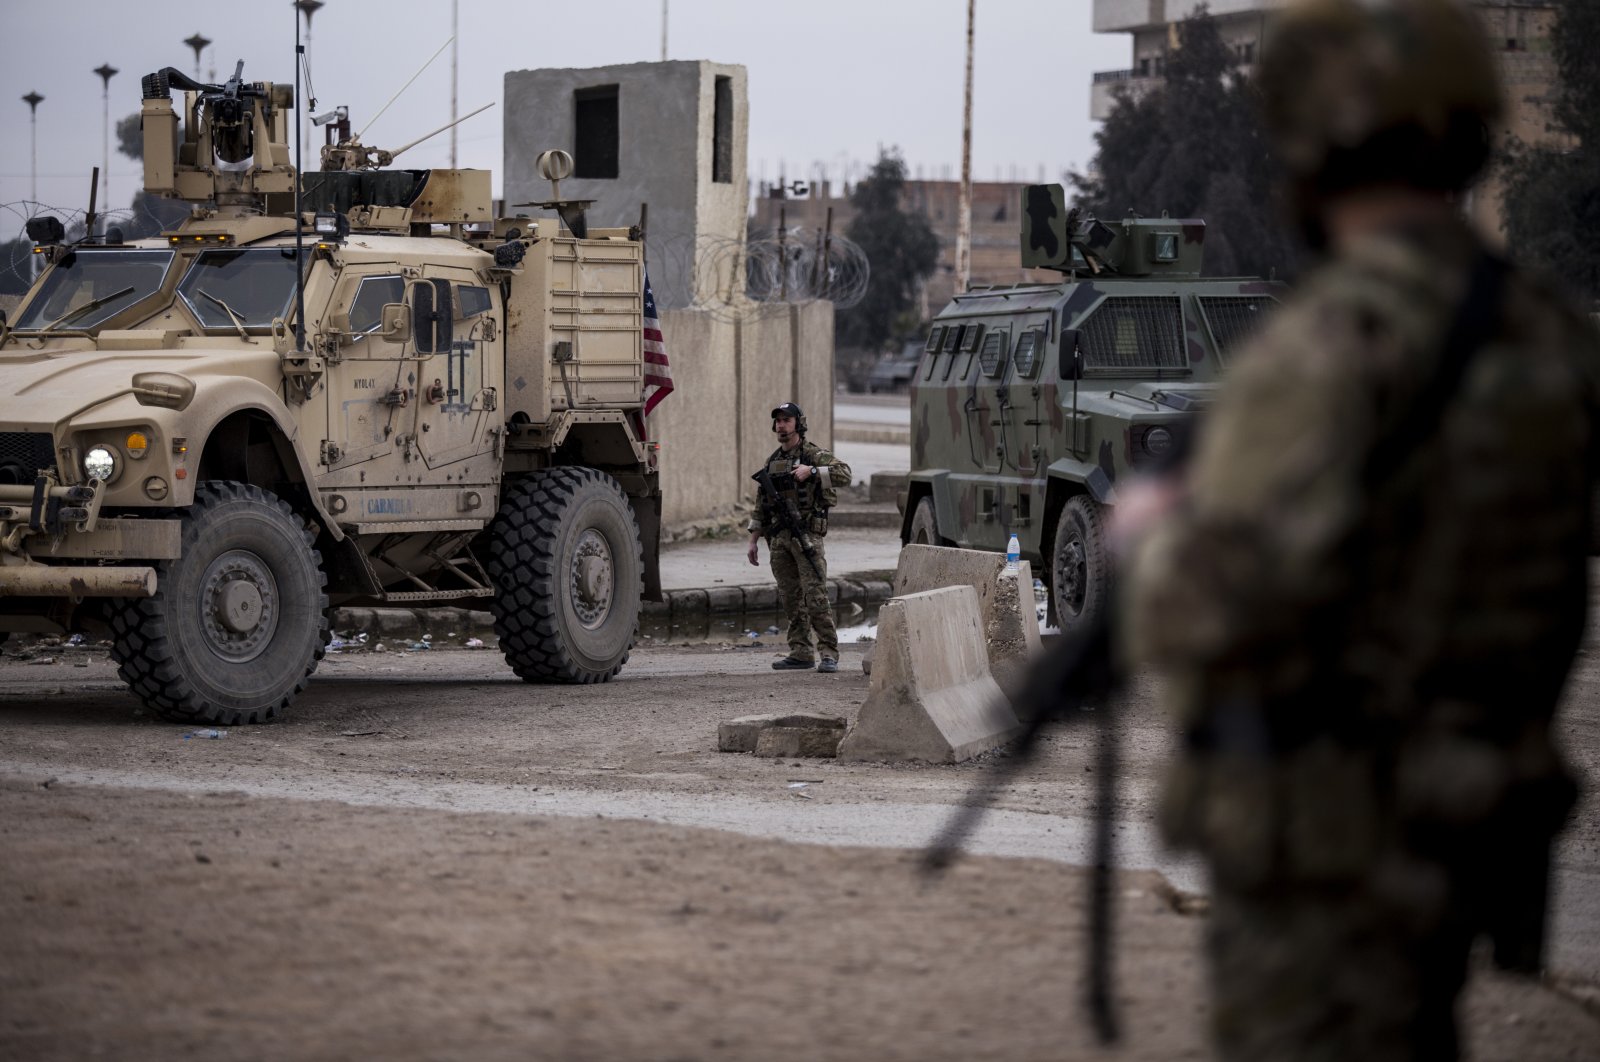 U.S. soldiers stand guard in Hassakeh, northeast Syria, Jan. 27, 2022. (AP Photo)